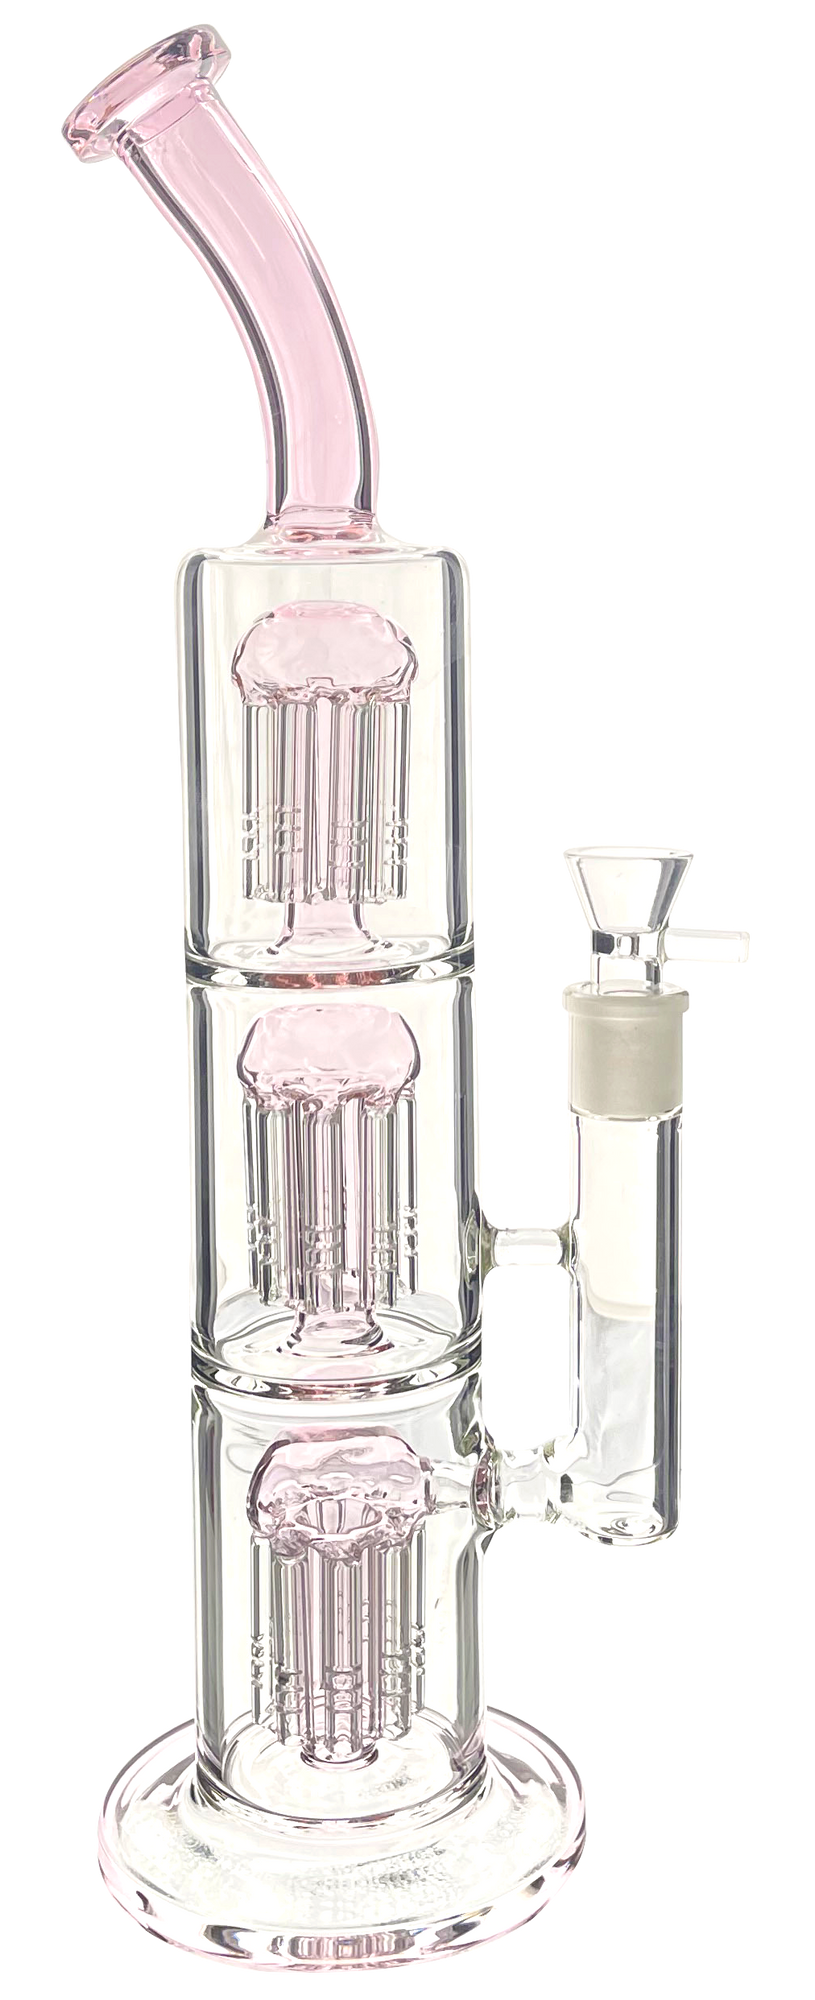 BEND COLOR MOUTHPIECE WITH TRIPLE TREE PERC